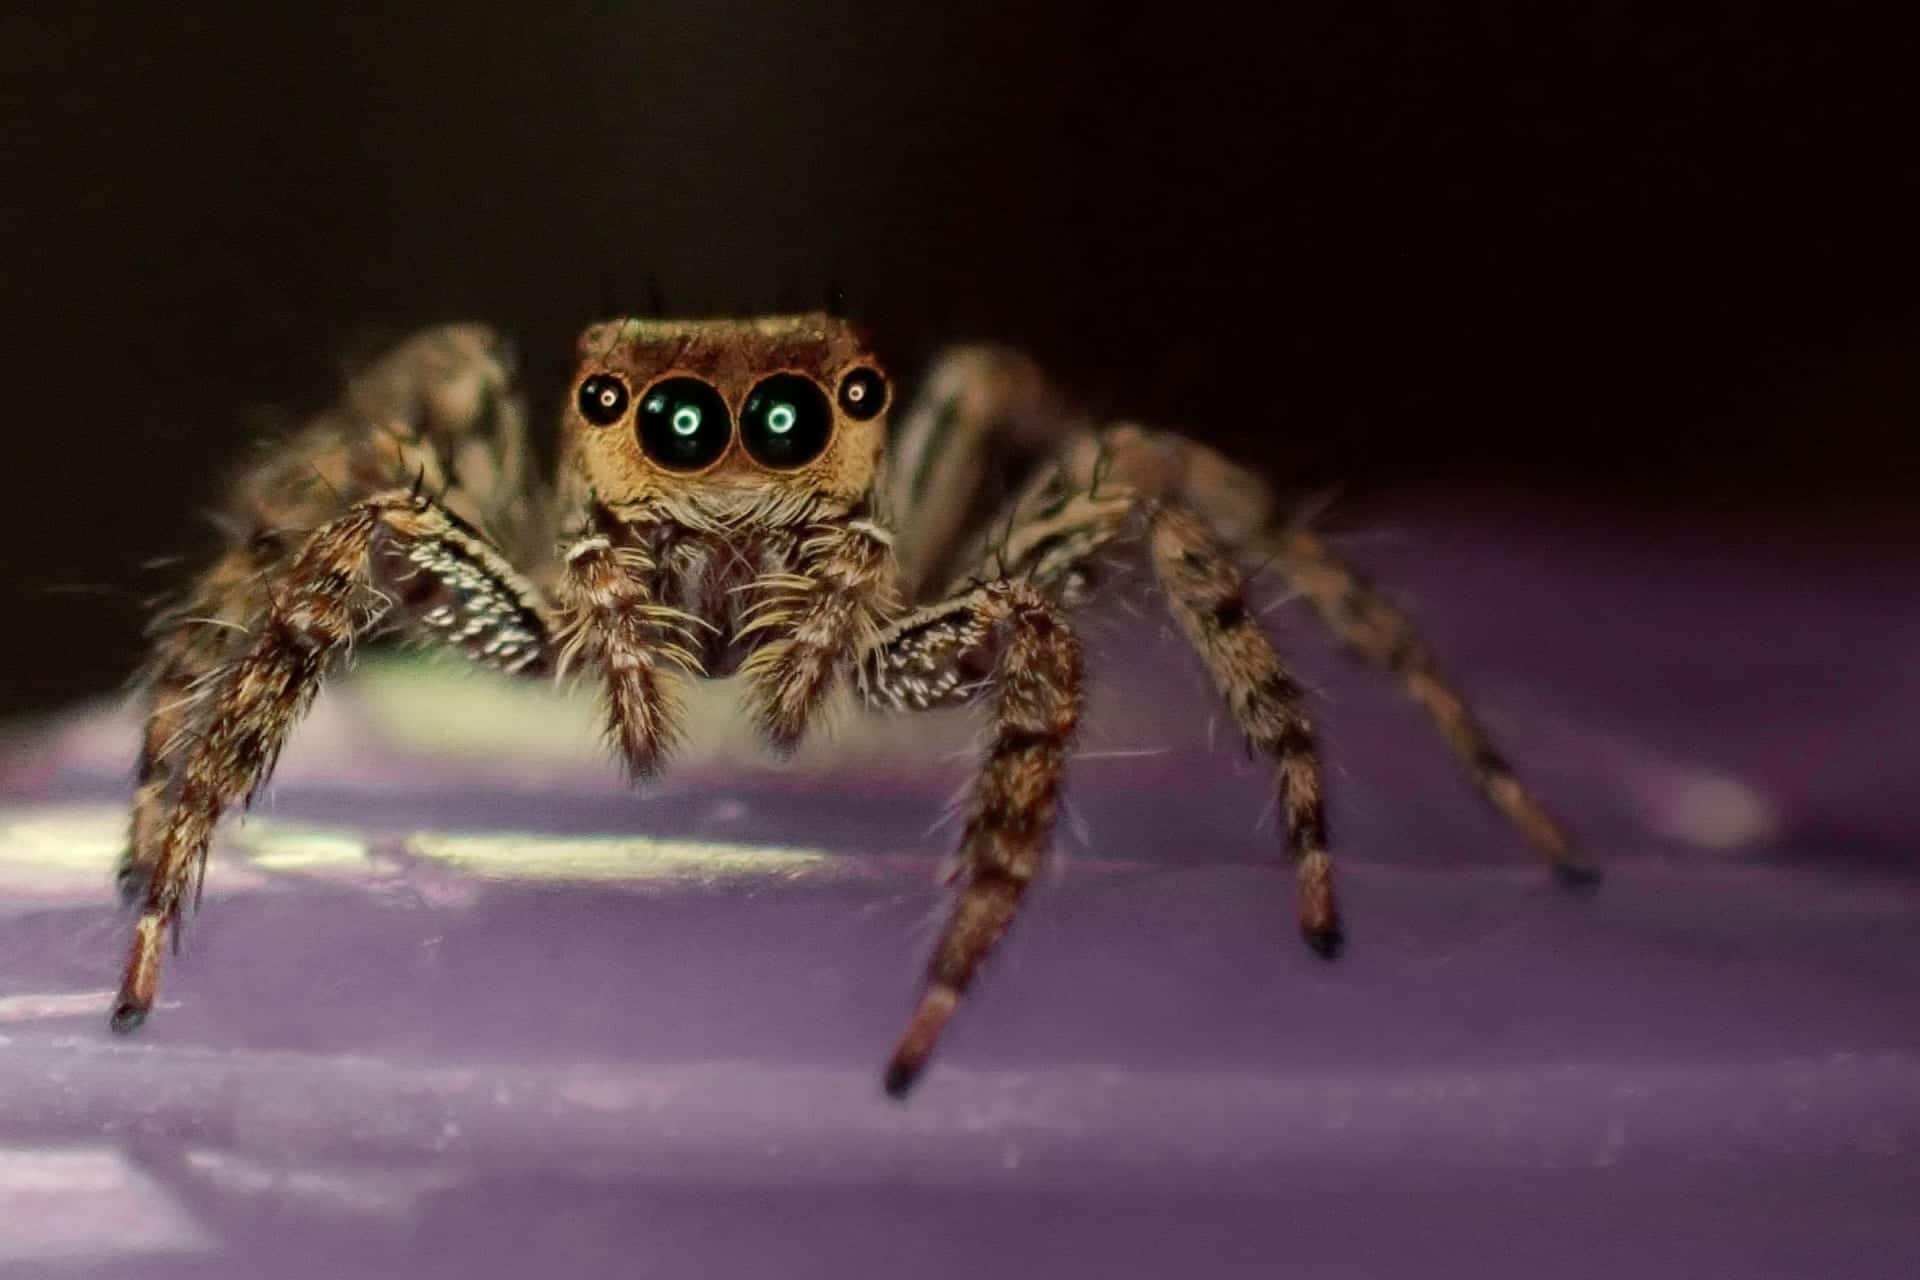 If you can tolerate looking at them, spiders are fascinating!